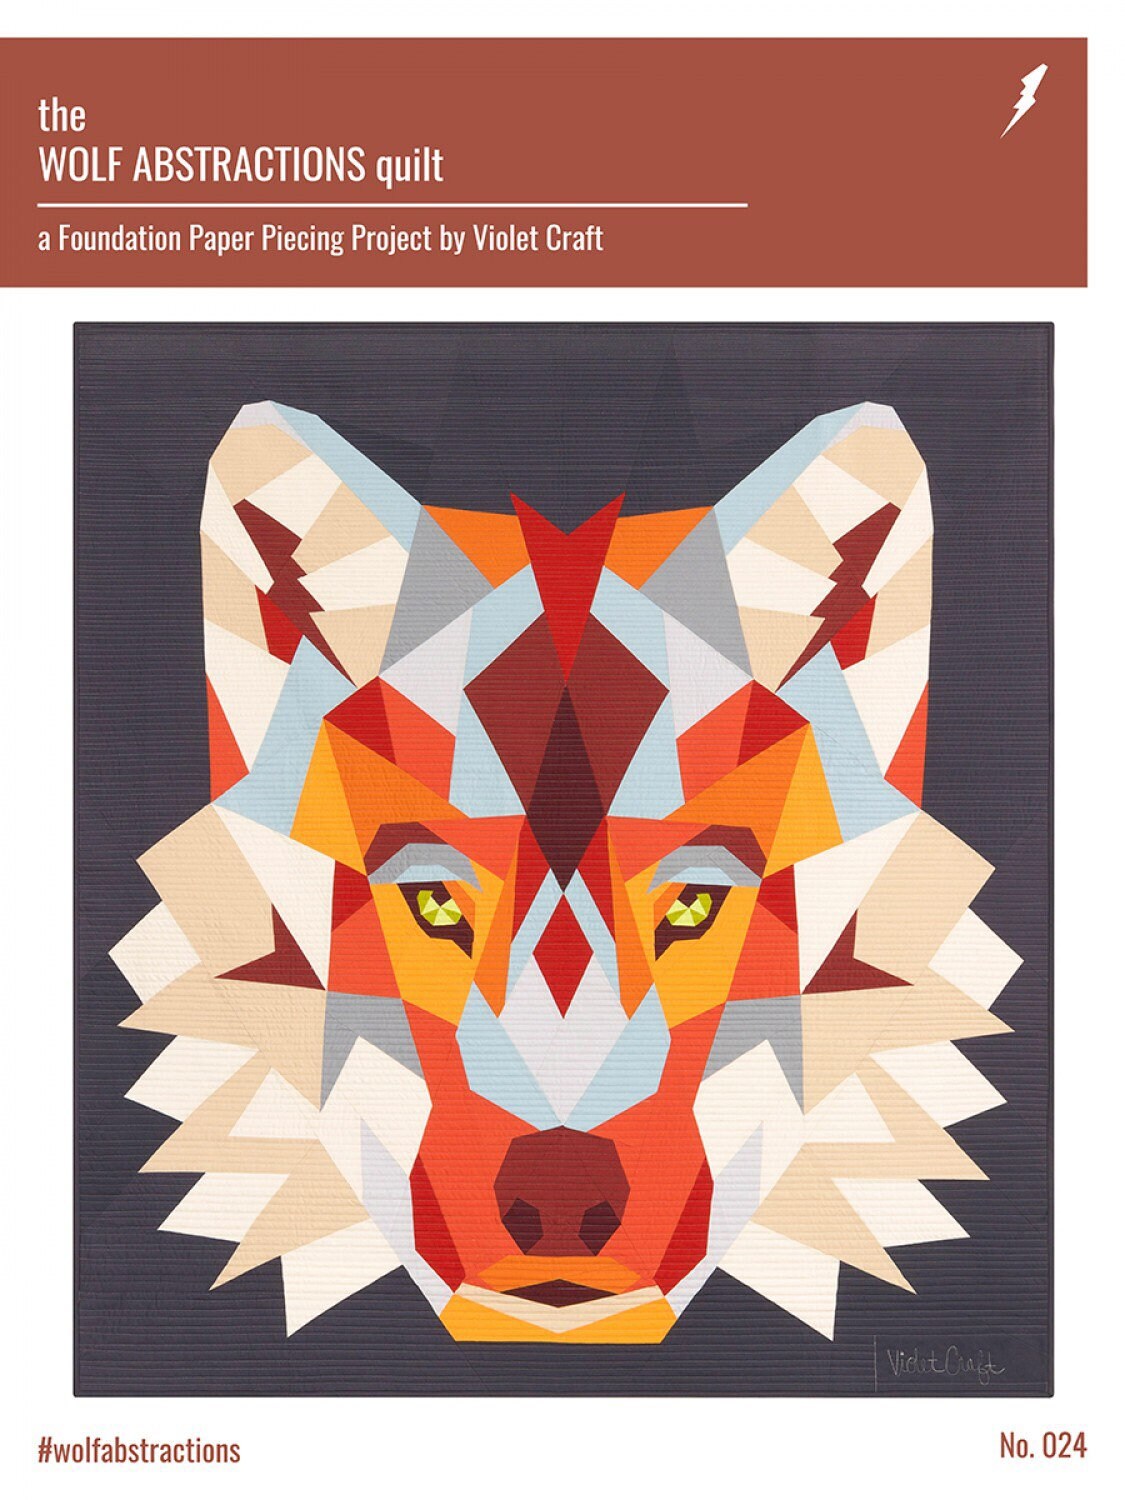 The Wolf Abstractions Quilt  - Violet Craft - Foundation Paper Piecing Pattern